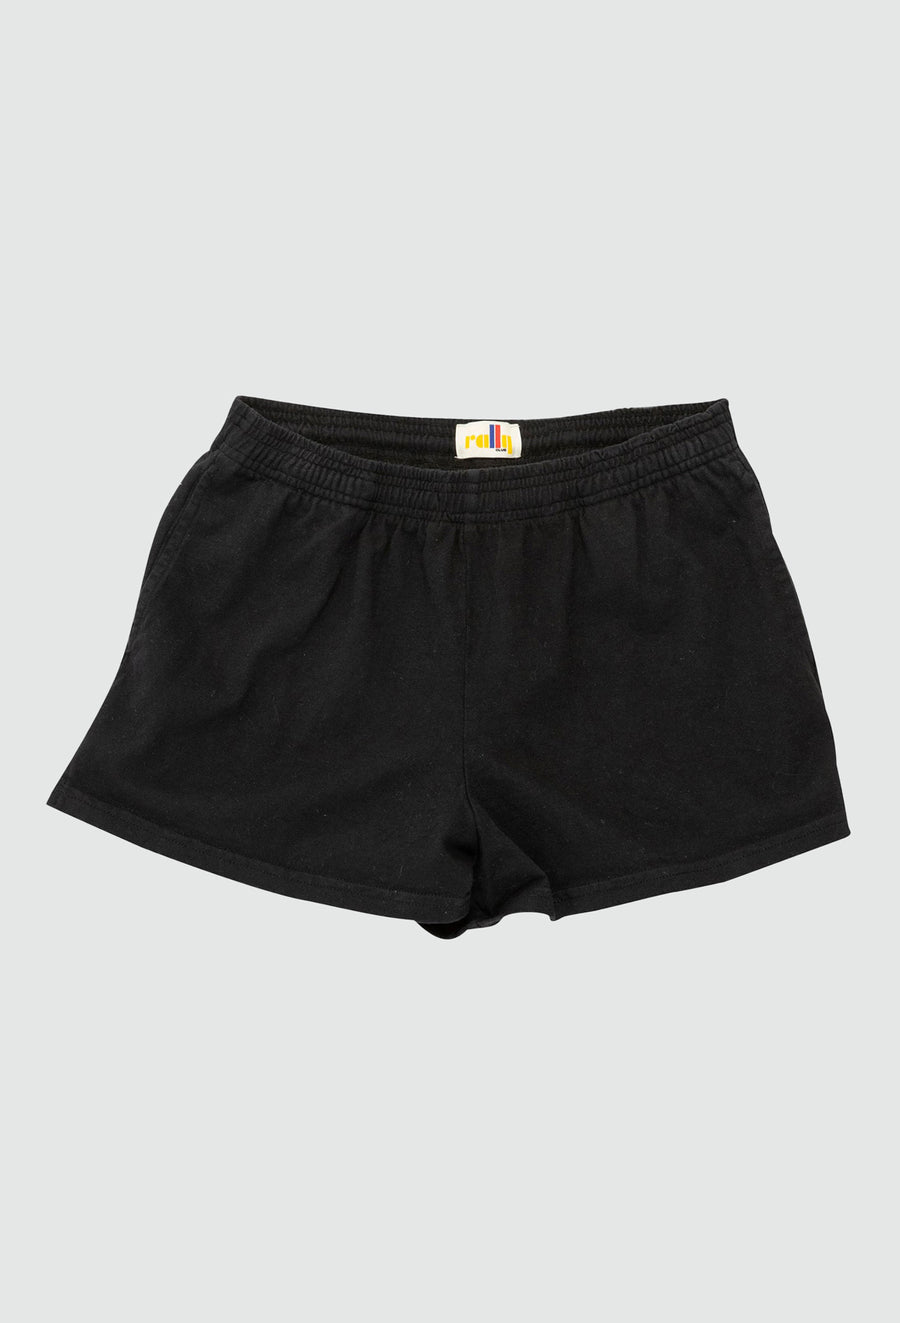 Chas Short in Black Front Flat View 2 